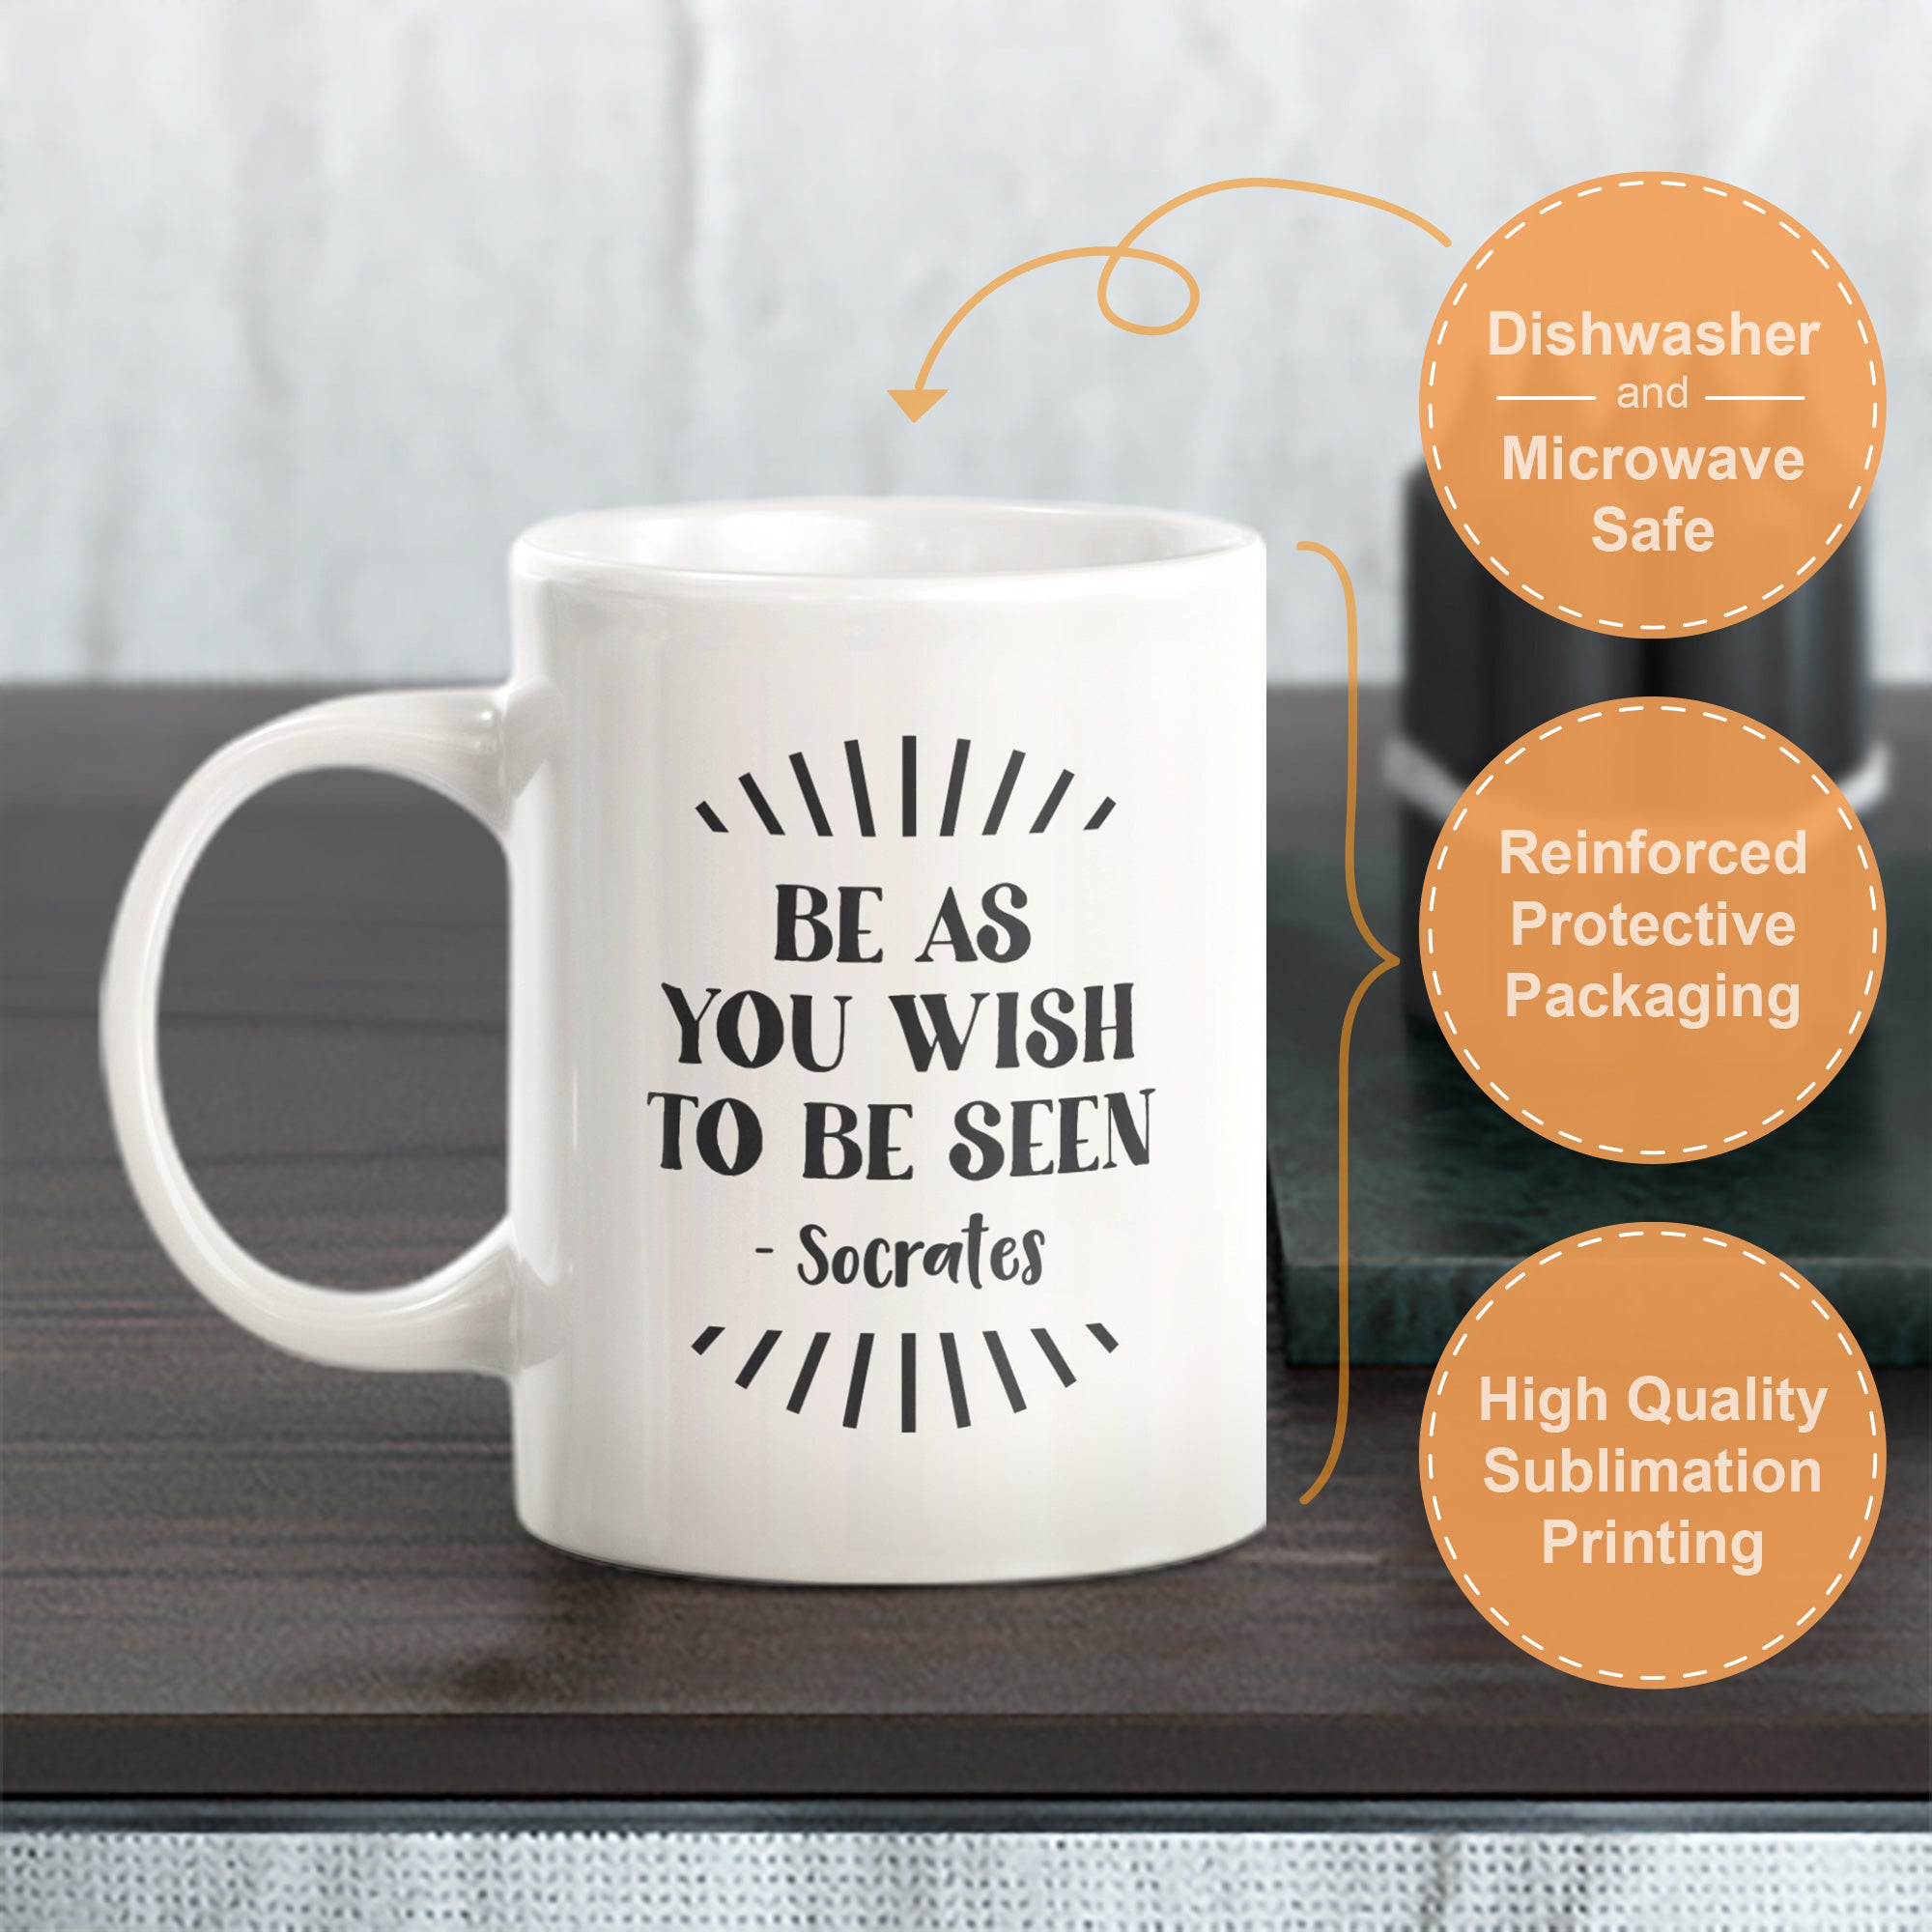 Be As You Wish To Be Seen - Socrates Coffee Mug